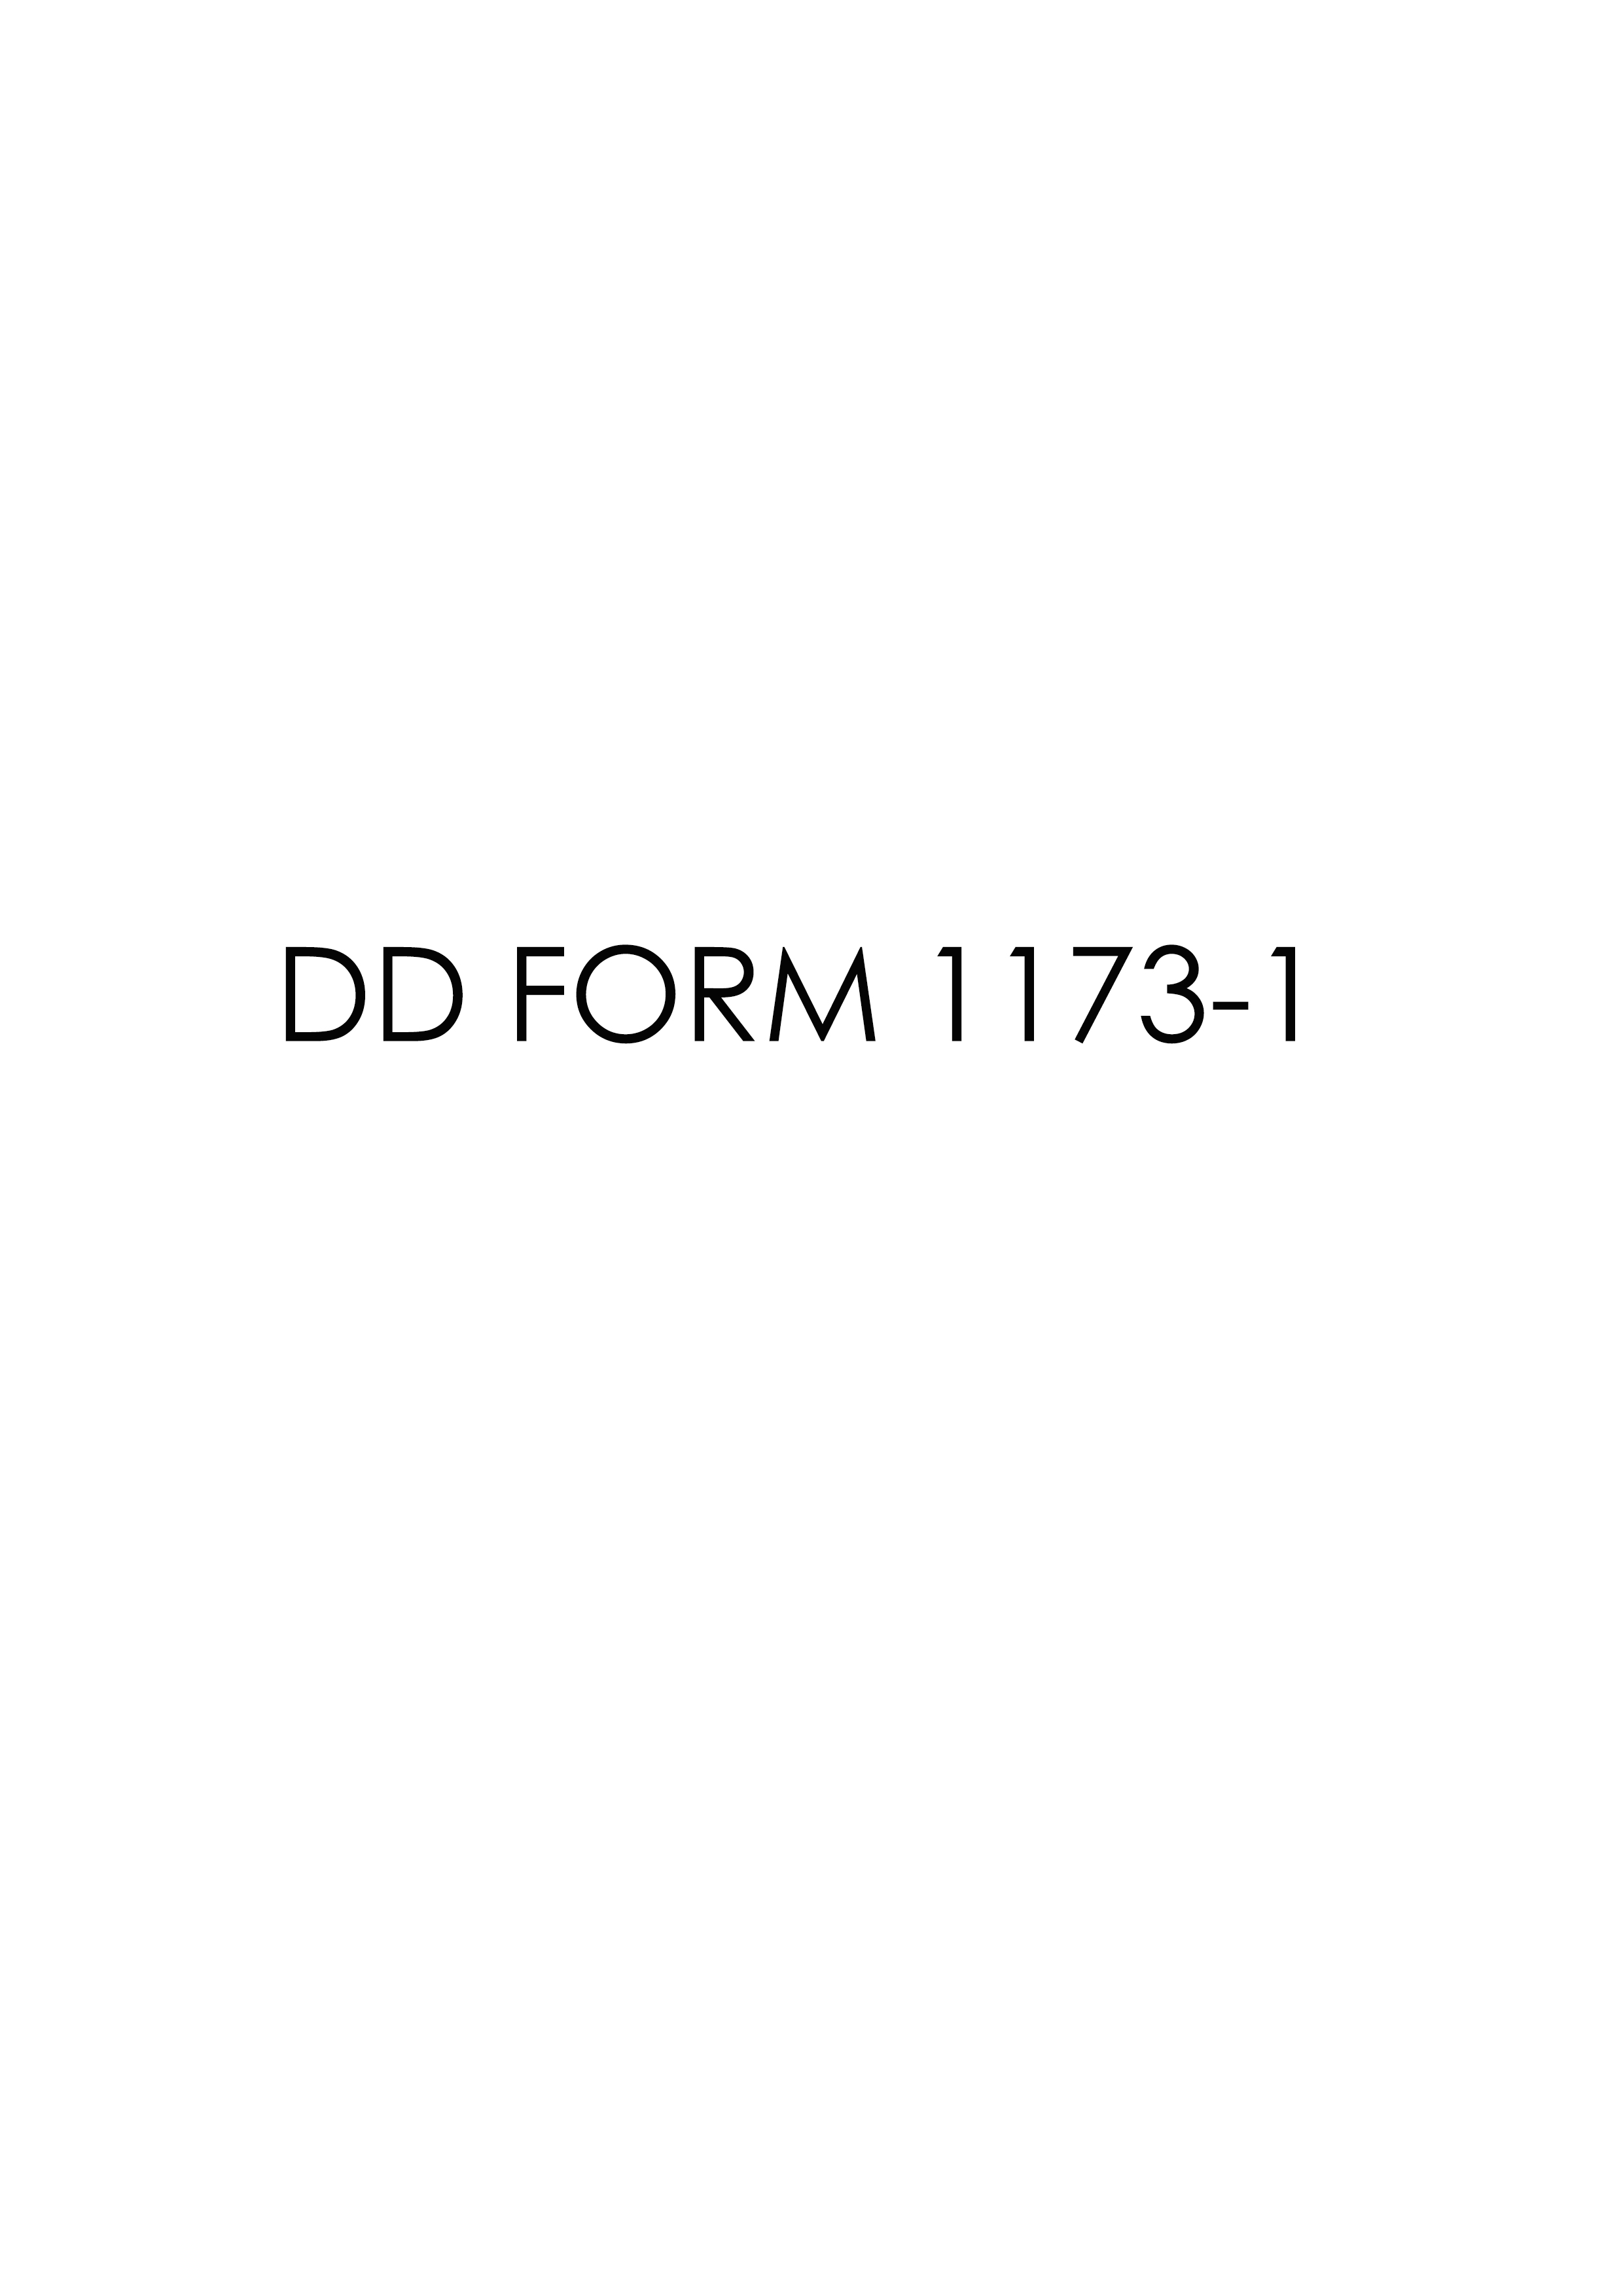 dd Form 1173-1 fillable